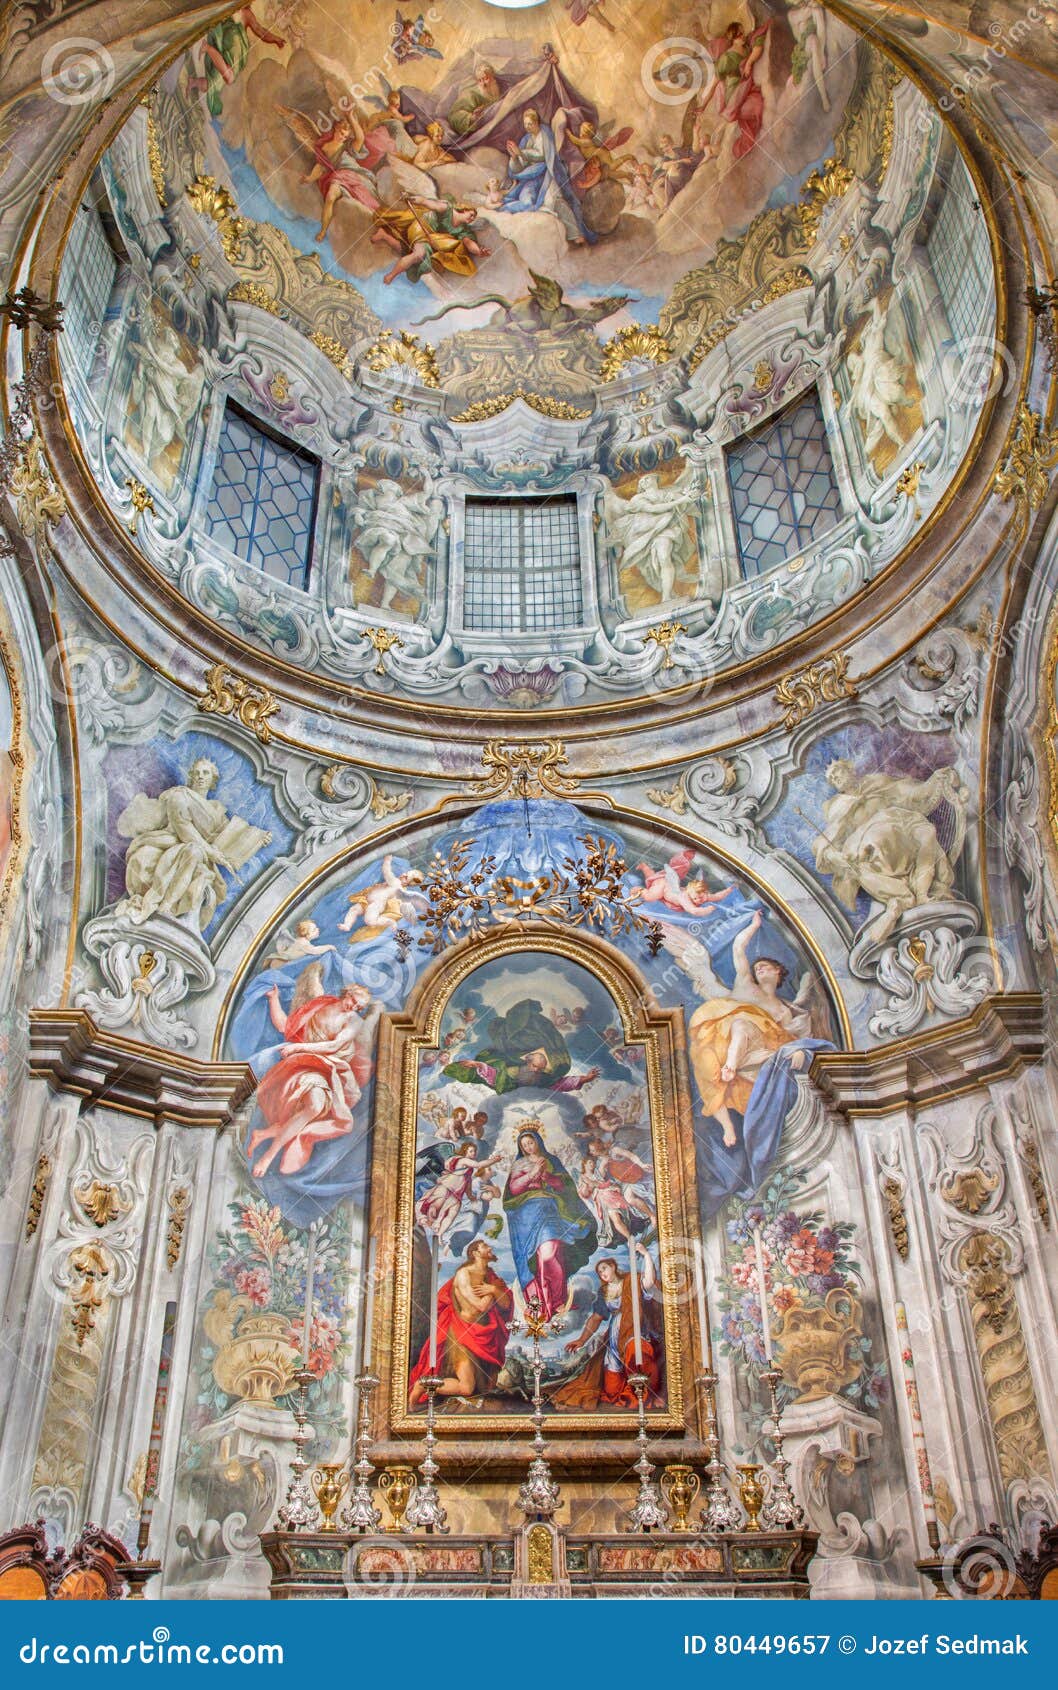 Brescia Italy May 22 16 The Immaculate Chapel In Church Chiesa Di San Francesco D Assisi With Immaculate Altar Stock Image Image Of Saint Lombardy